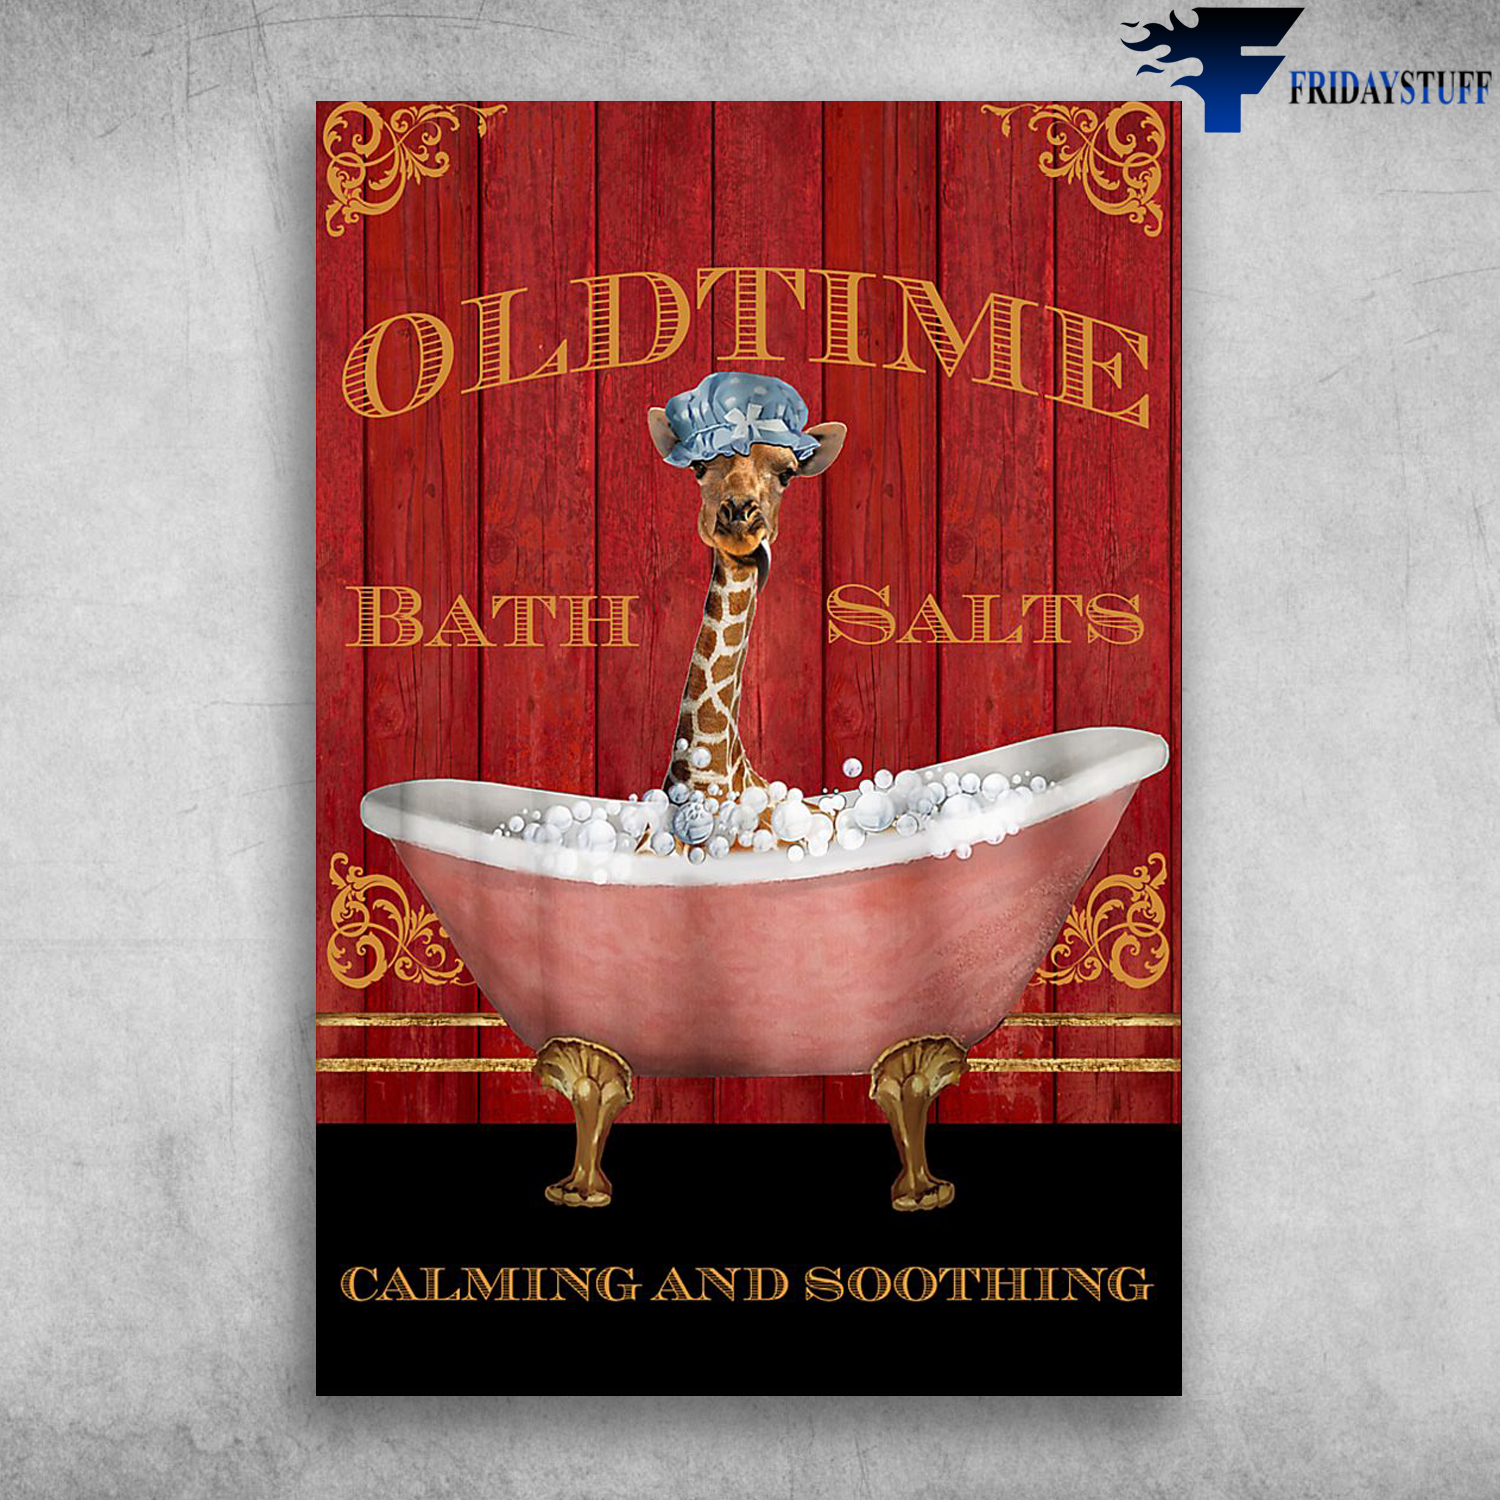 Old Time Bath Salts Calming And Soothing Giraffe In Bathtub